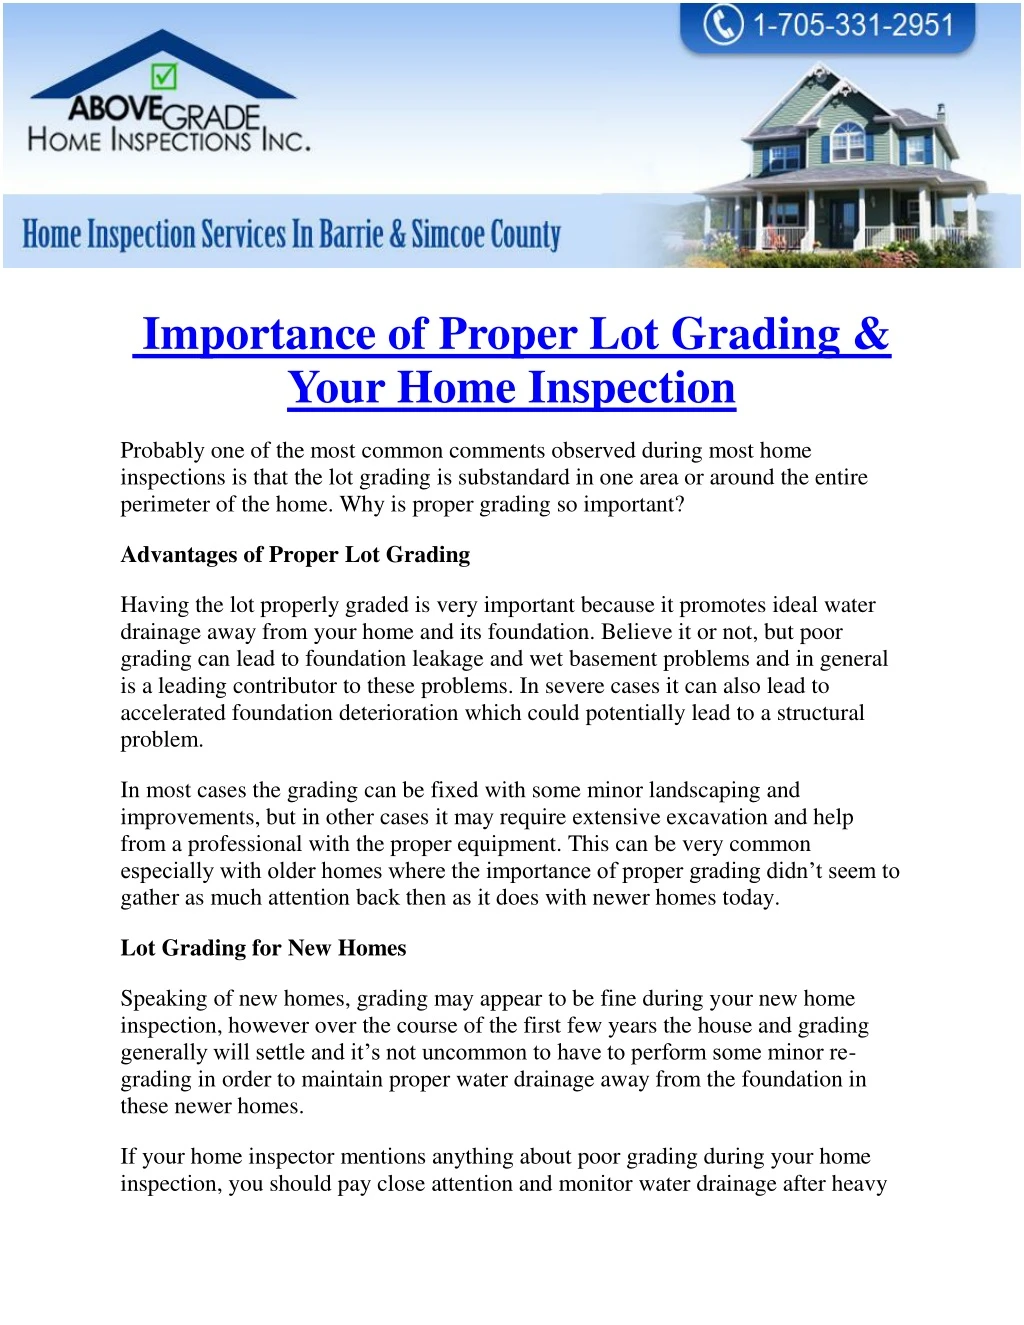 importance of proper lot grading your home